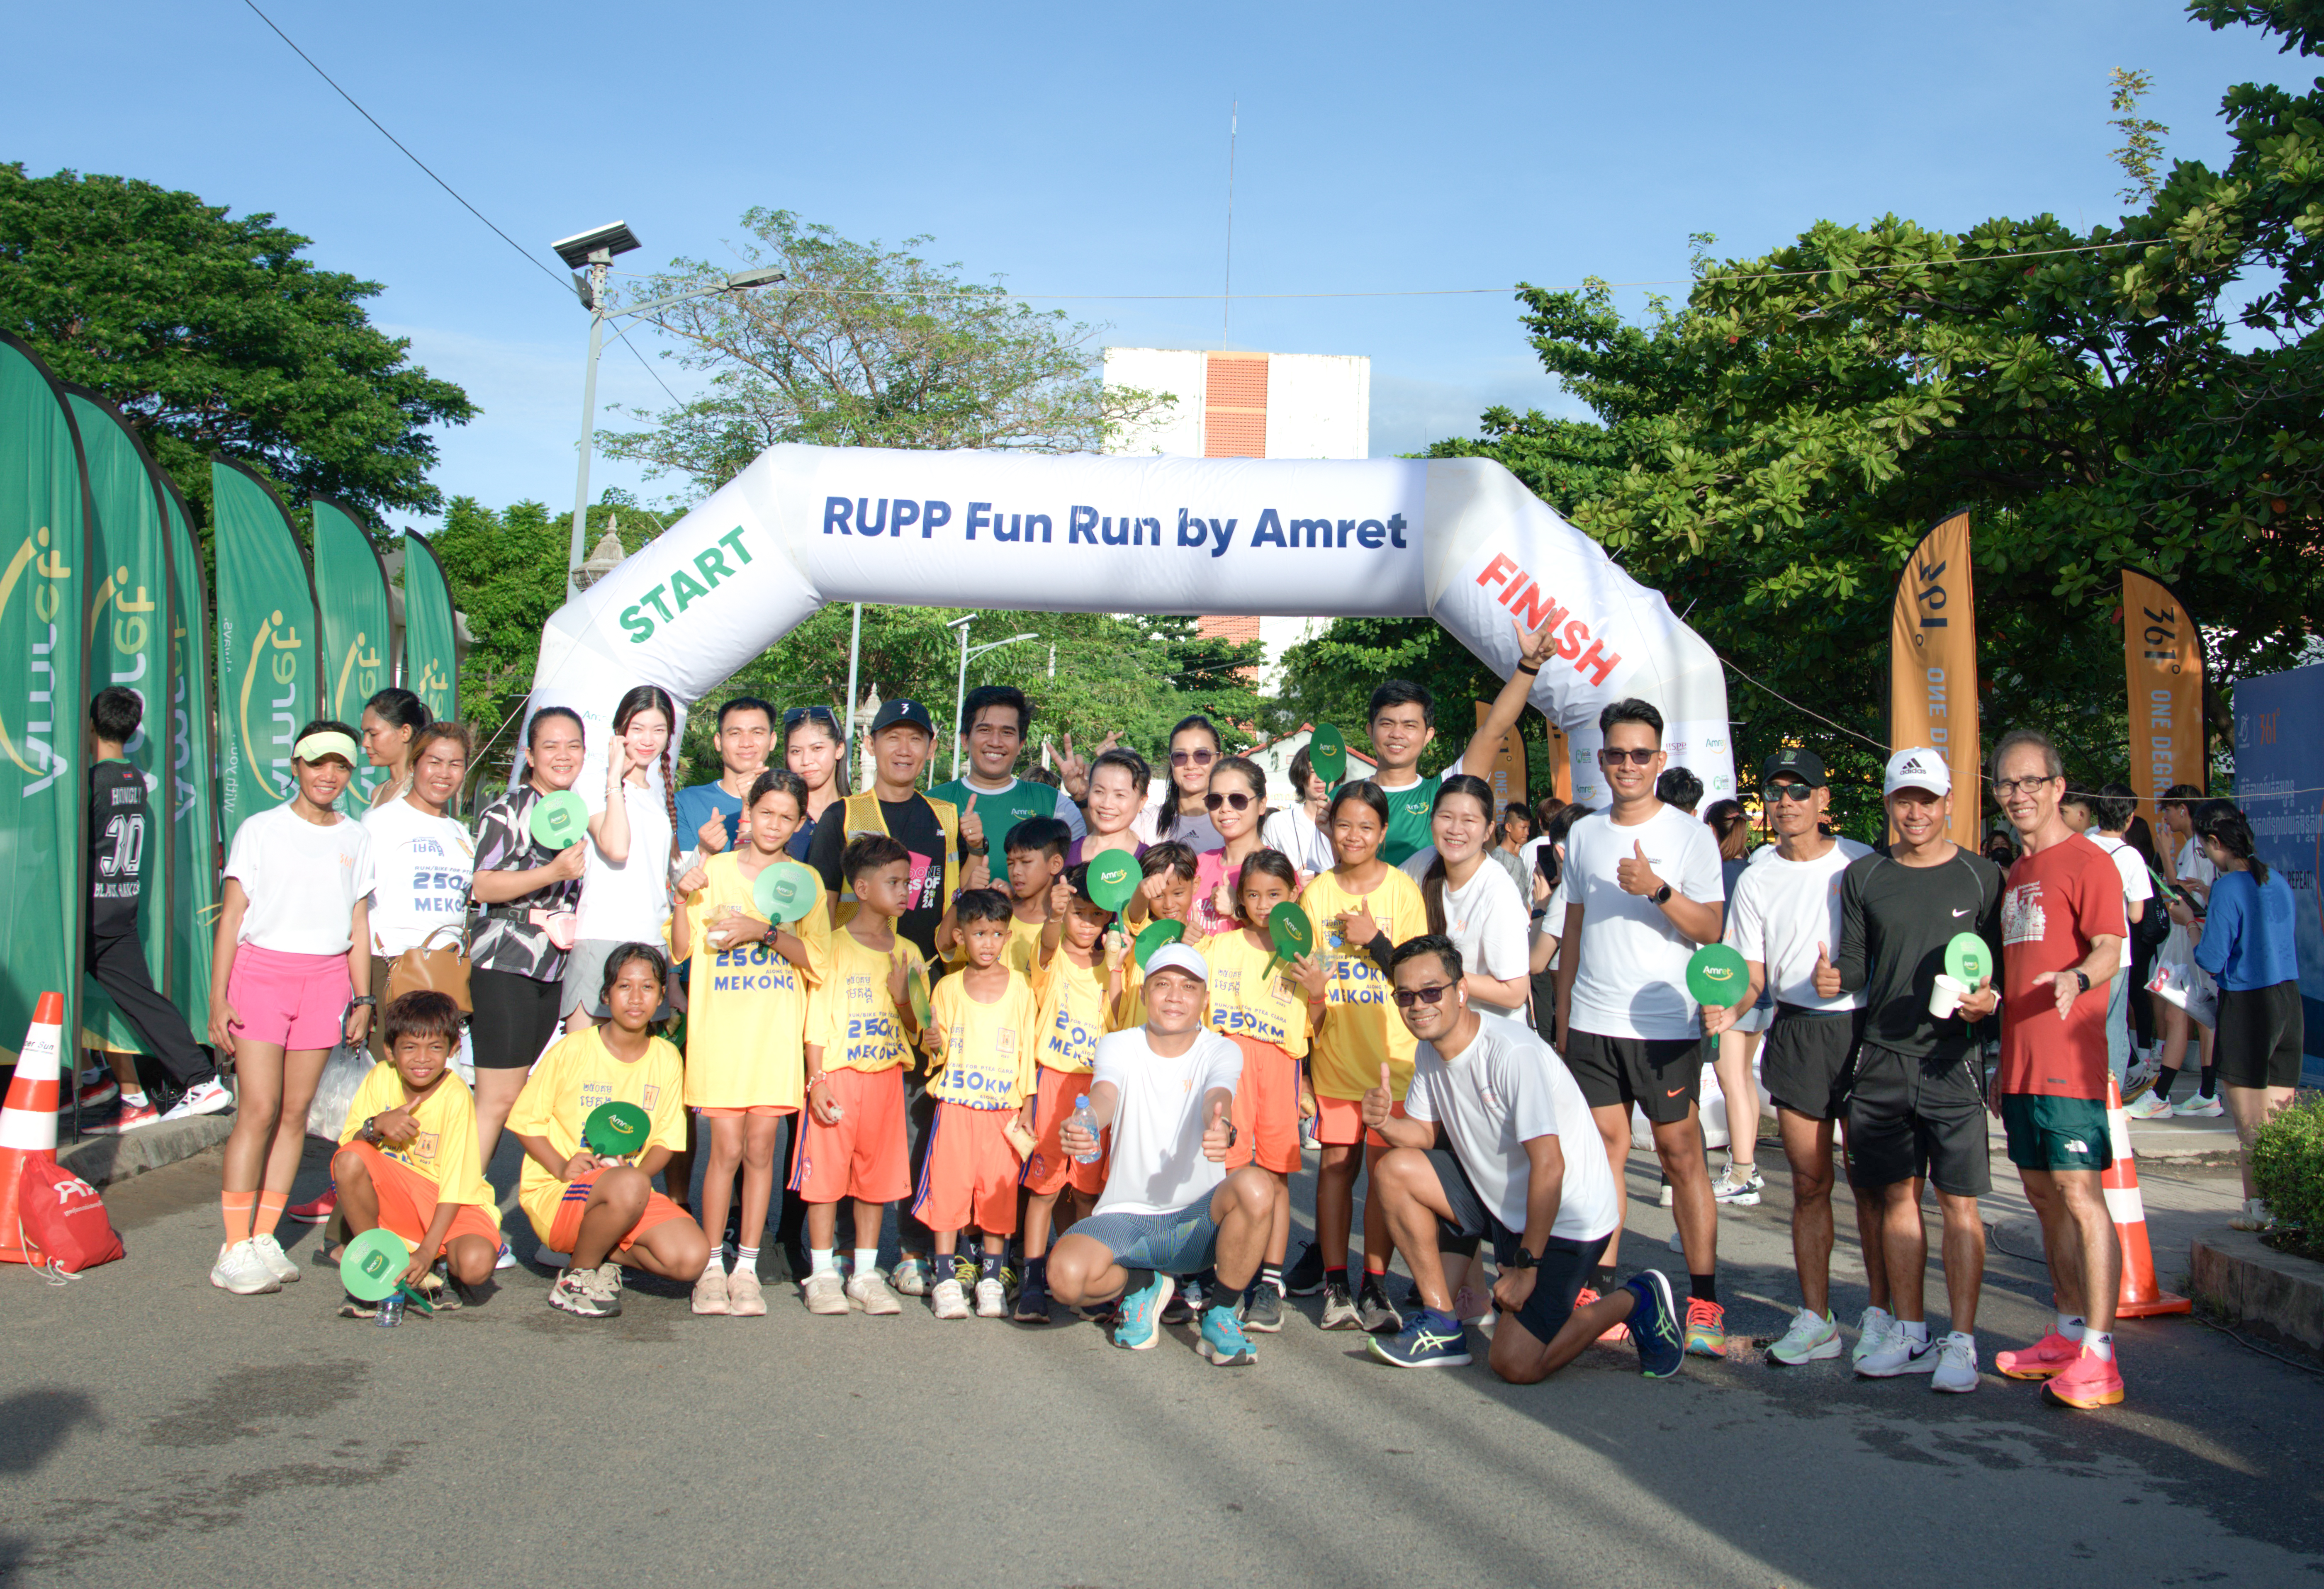 Amret MFI with KK Running Club organized a fun running event for the community